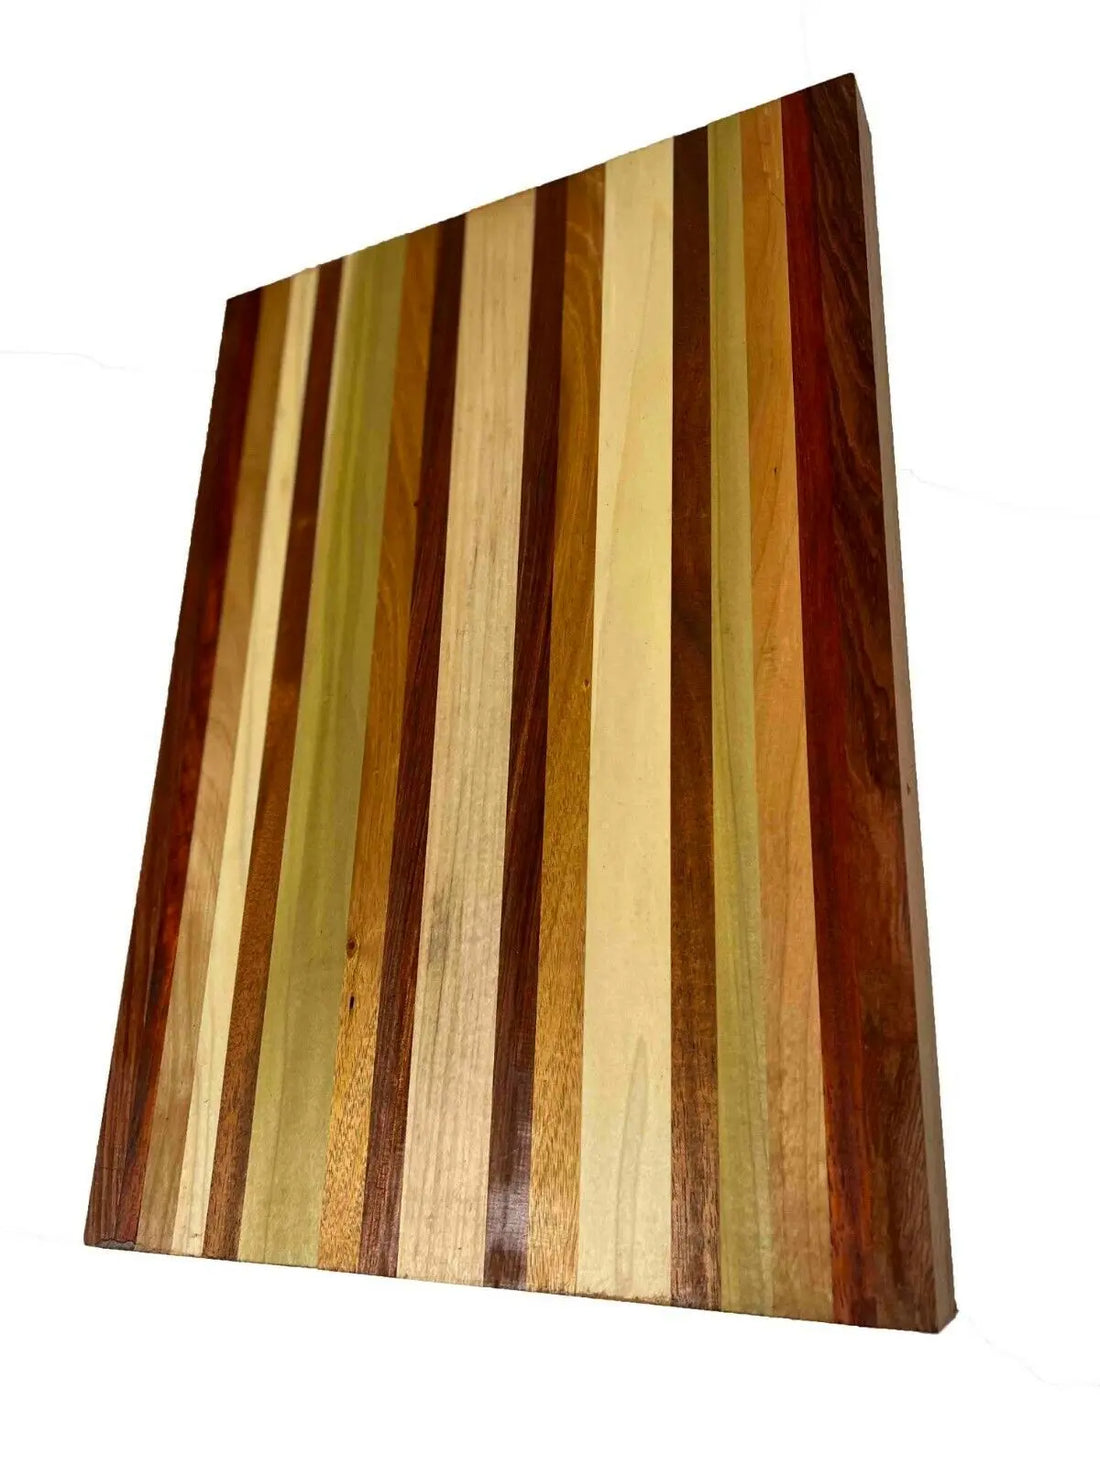 Bespoke Post reBoard Mini Cutting Board by Material 13.3”x 8.5” 75%  Recycled